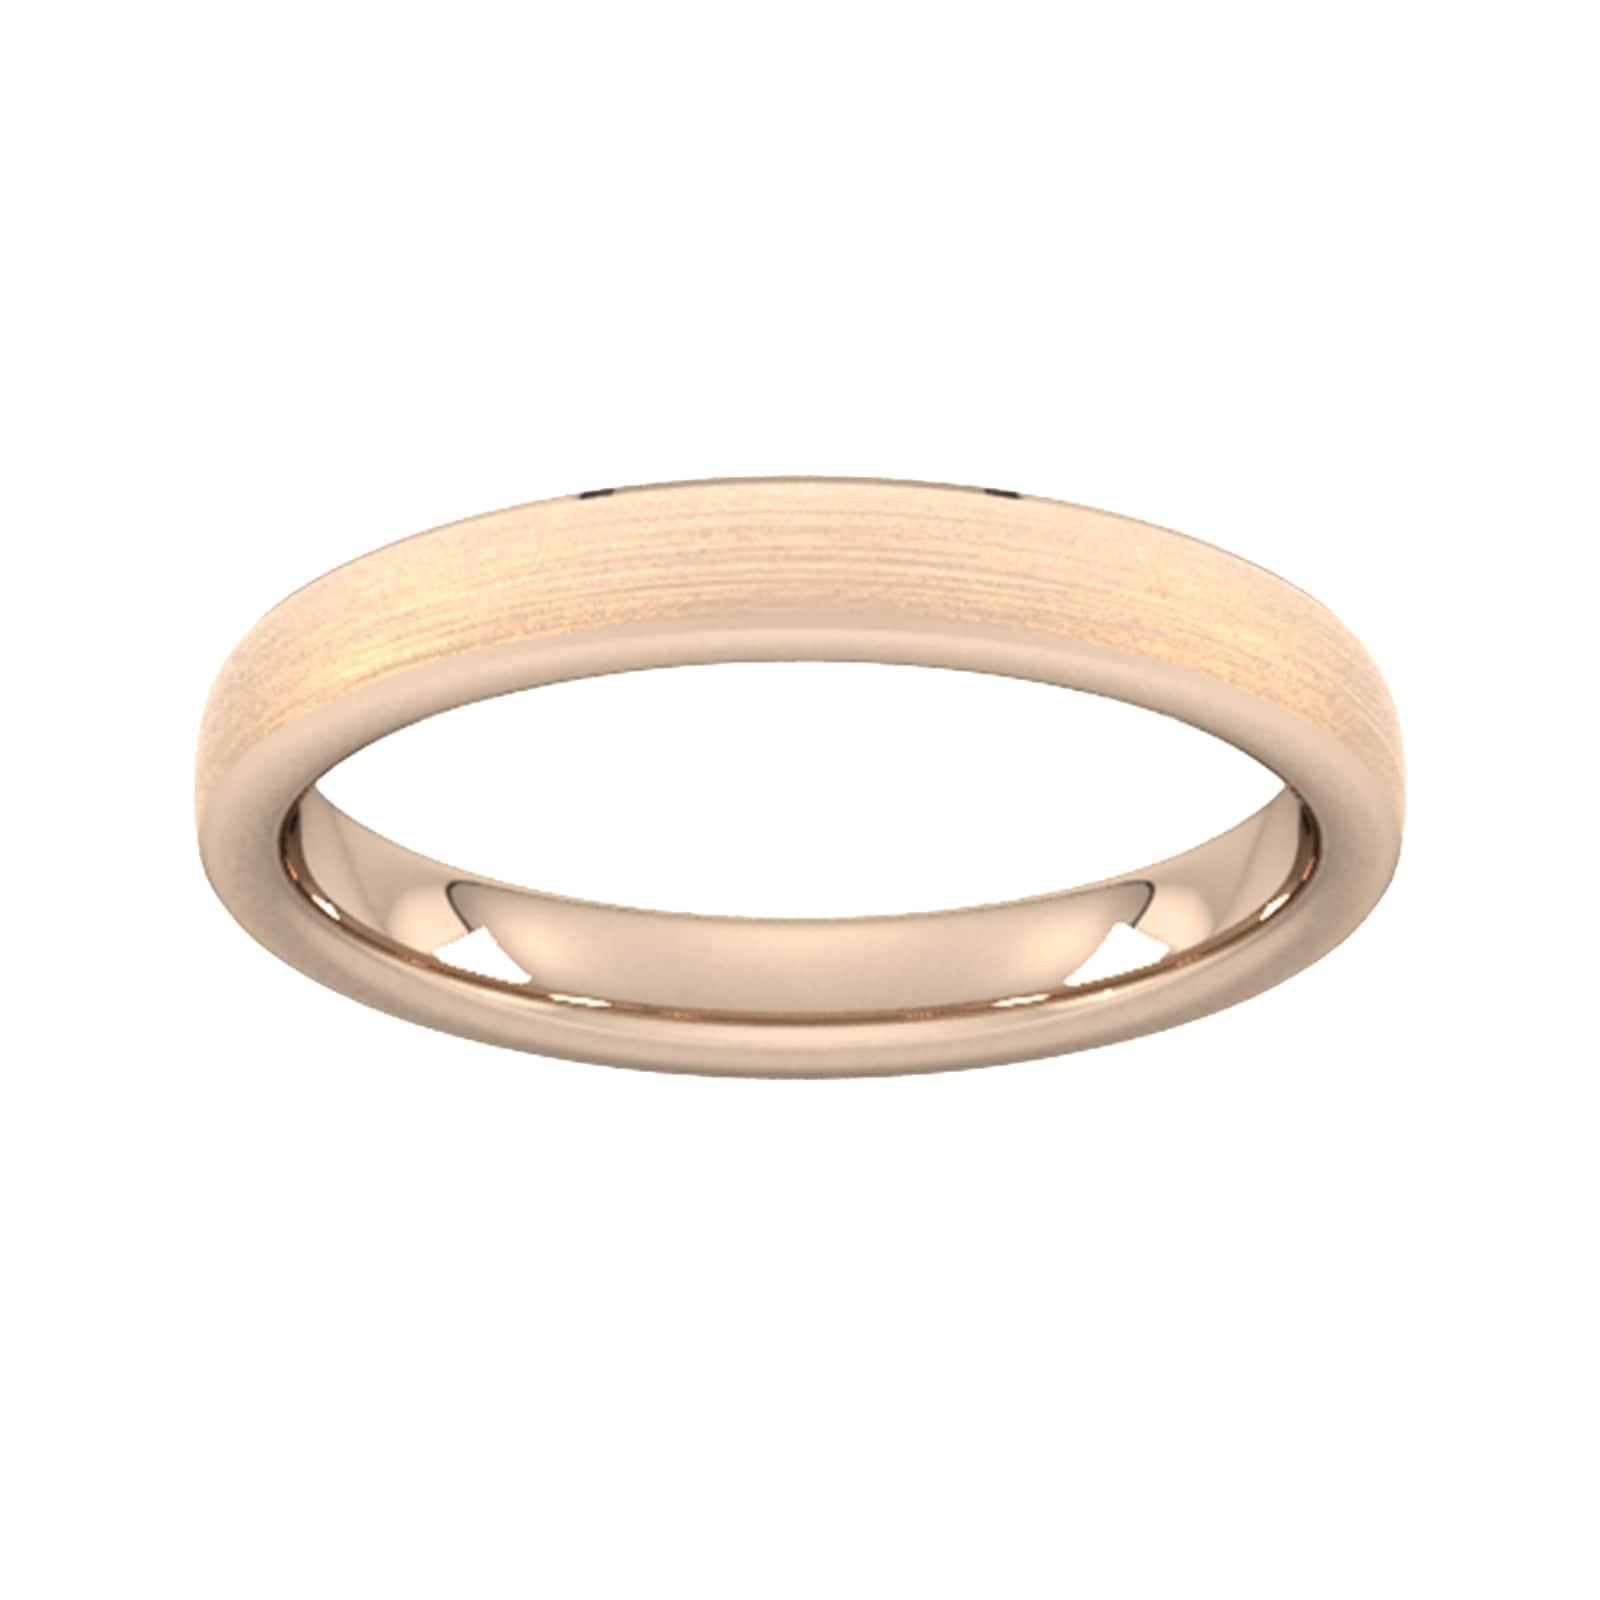 3mm D Shape Standard Polished Chamfered Edges With Matt Centre Wedding Ring In 9 Carat Rose Gold - Ring Size H